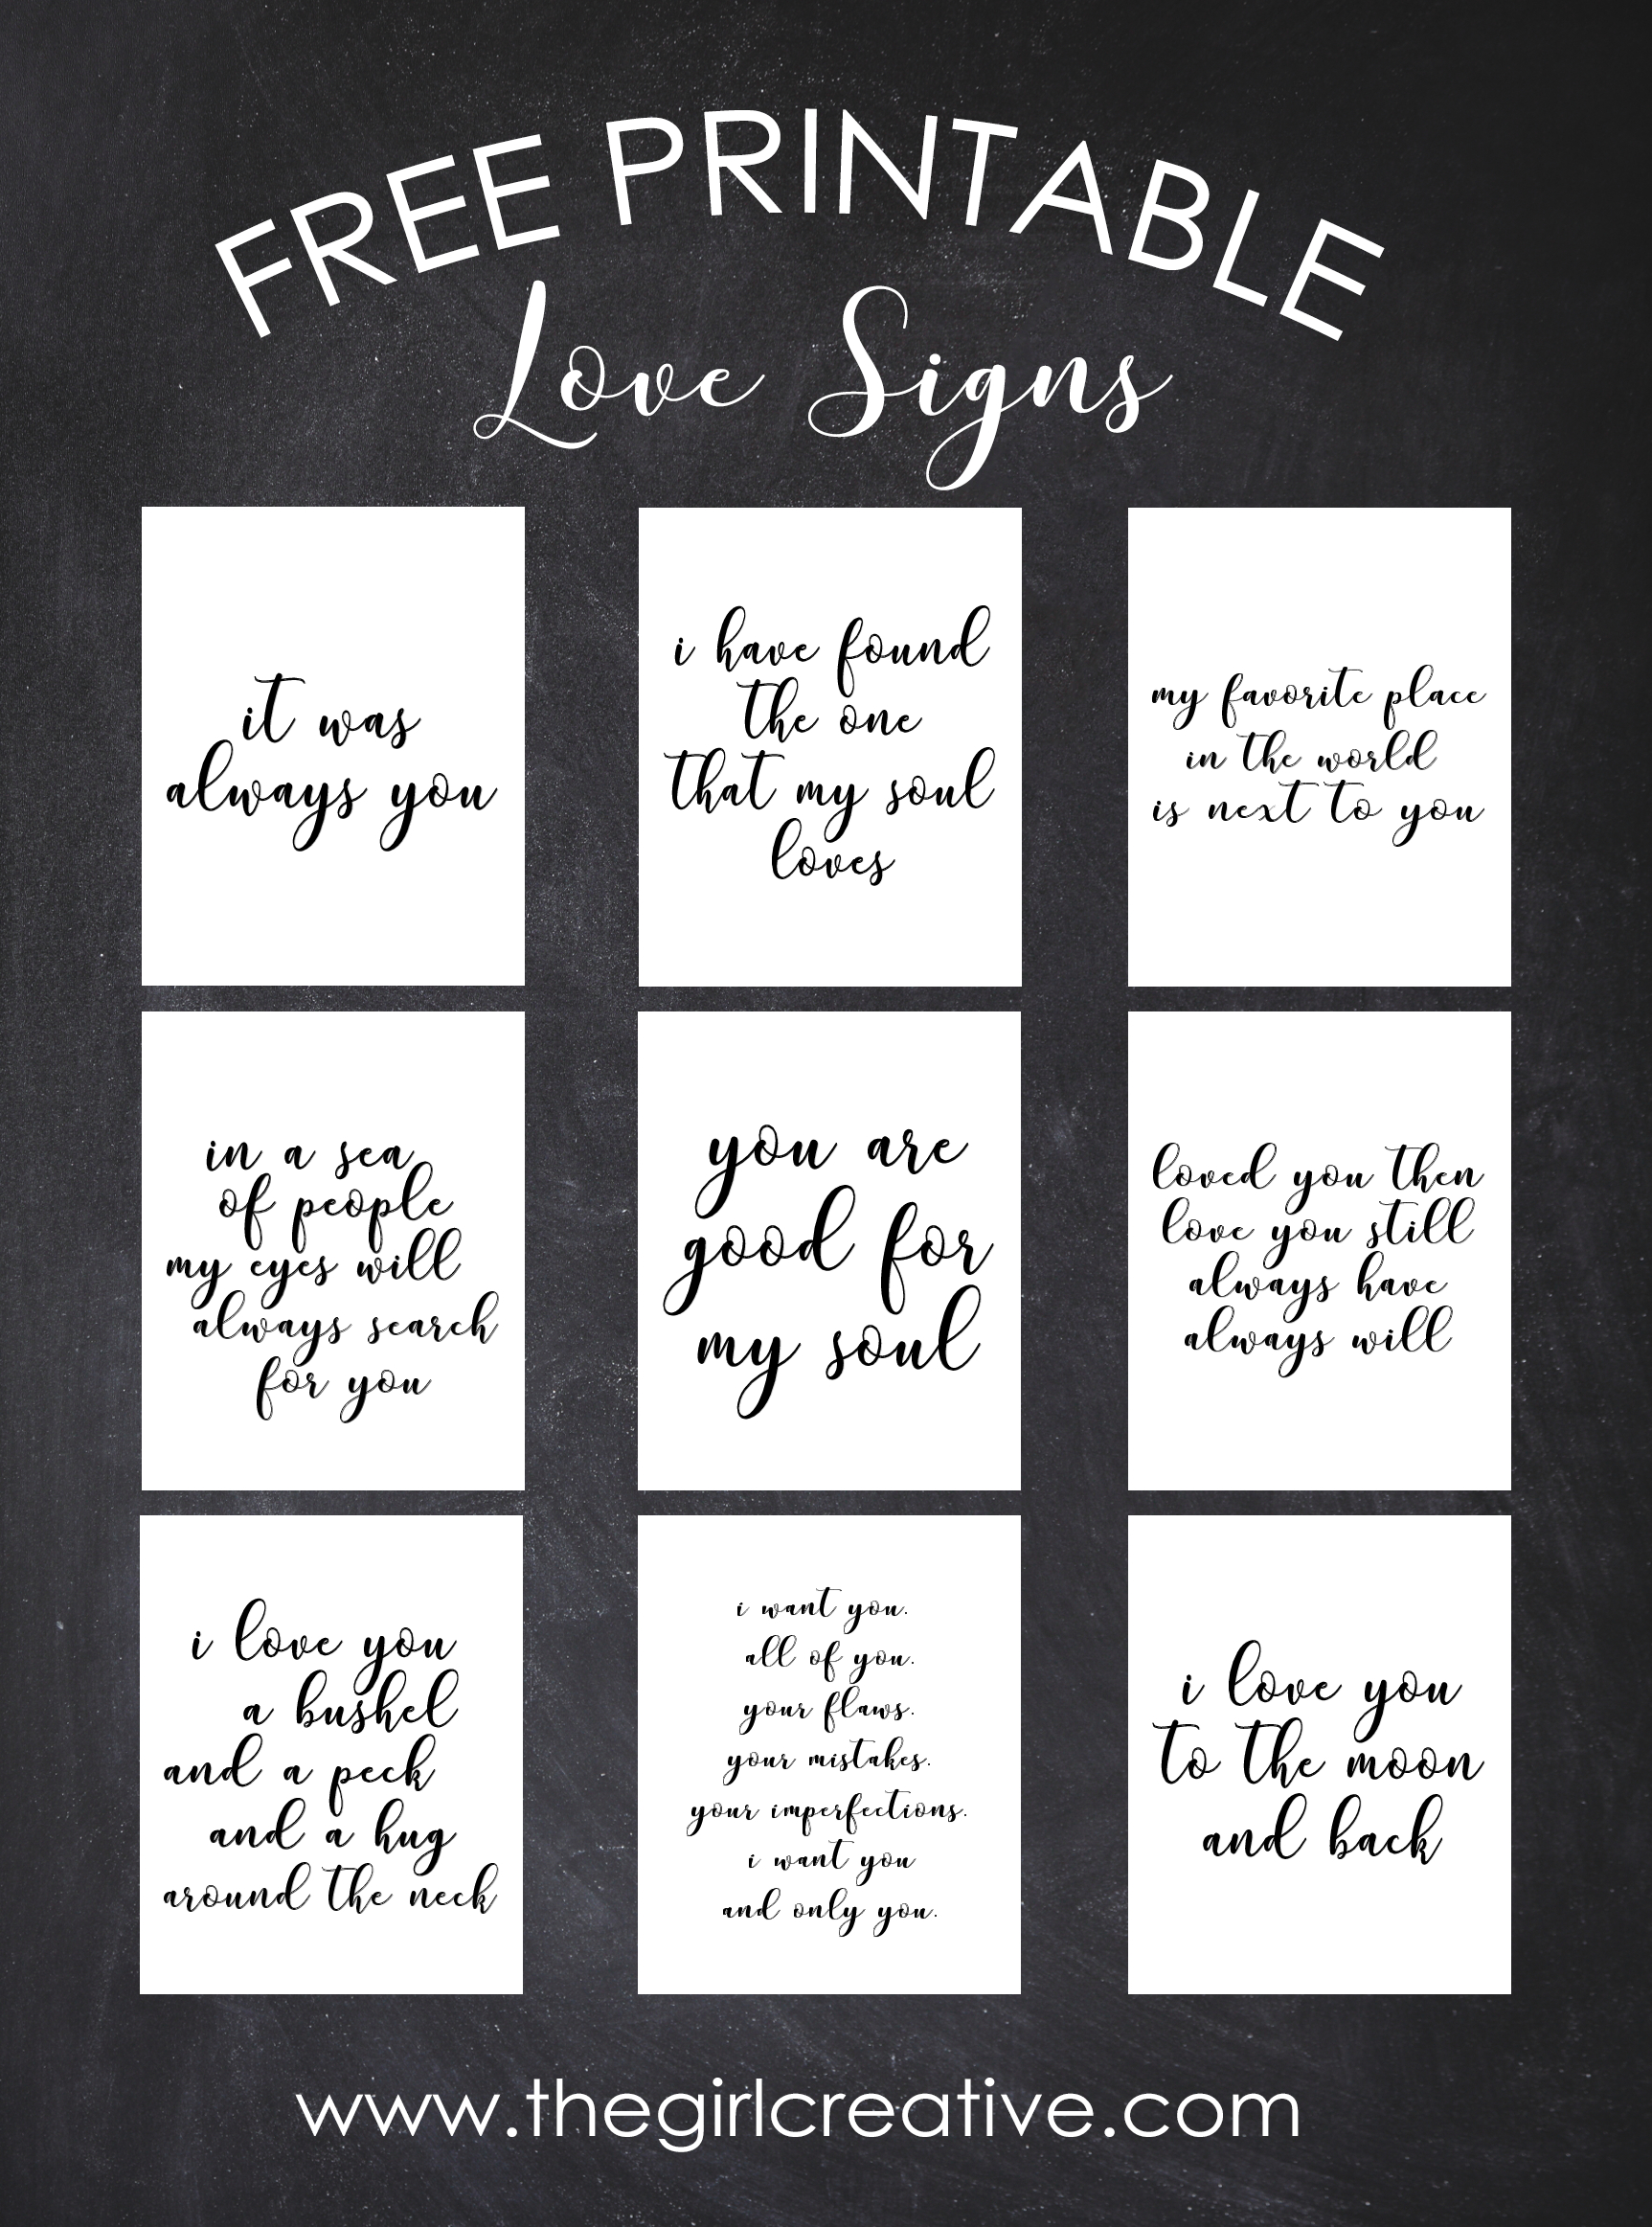 9 Free Printable Love Signs | Party Ideas | Pinterest | Stampabili - Free Printable Bathroom Signs